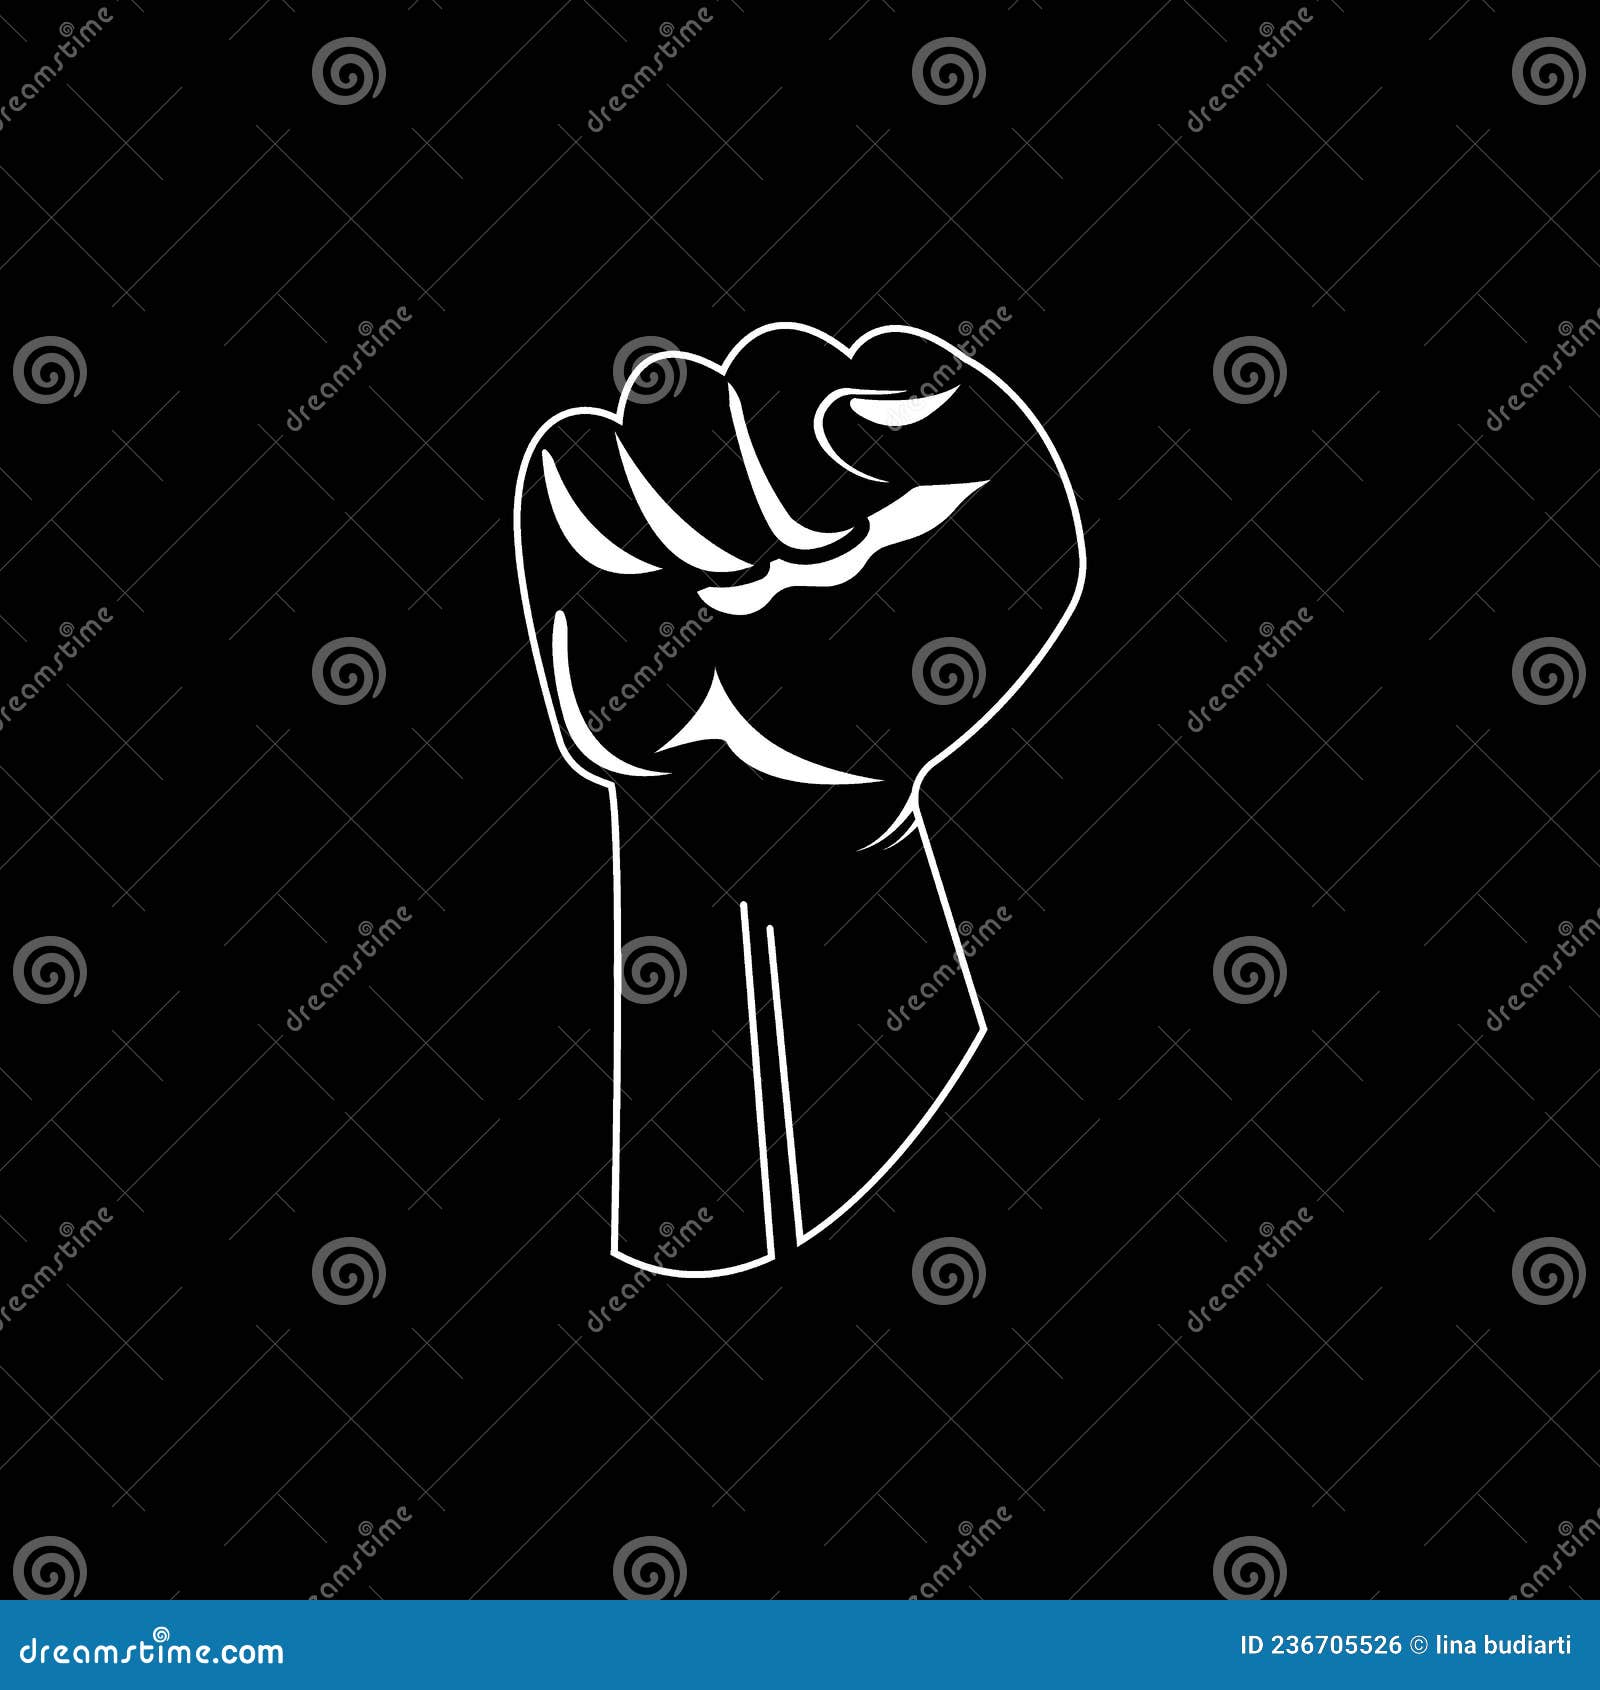 Fist icon stock vector. Illustration of silhouette, clenched - 236705526